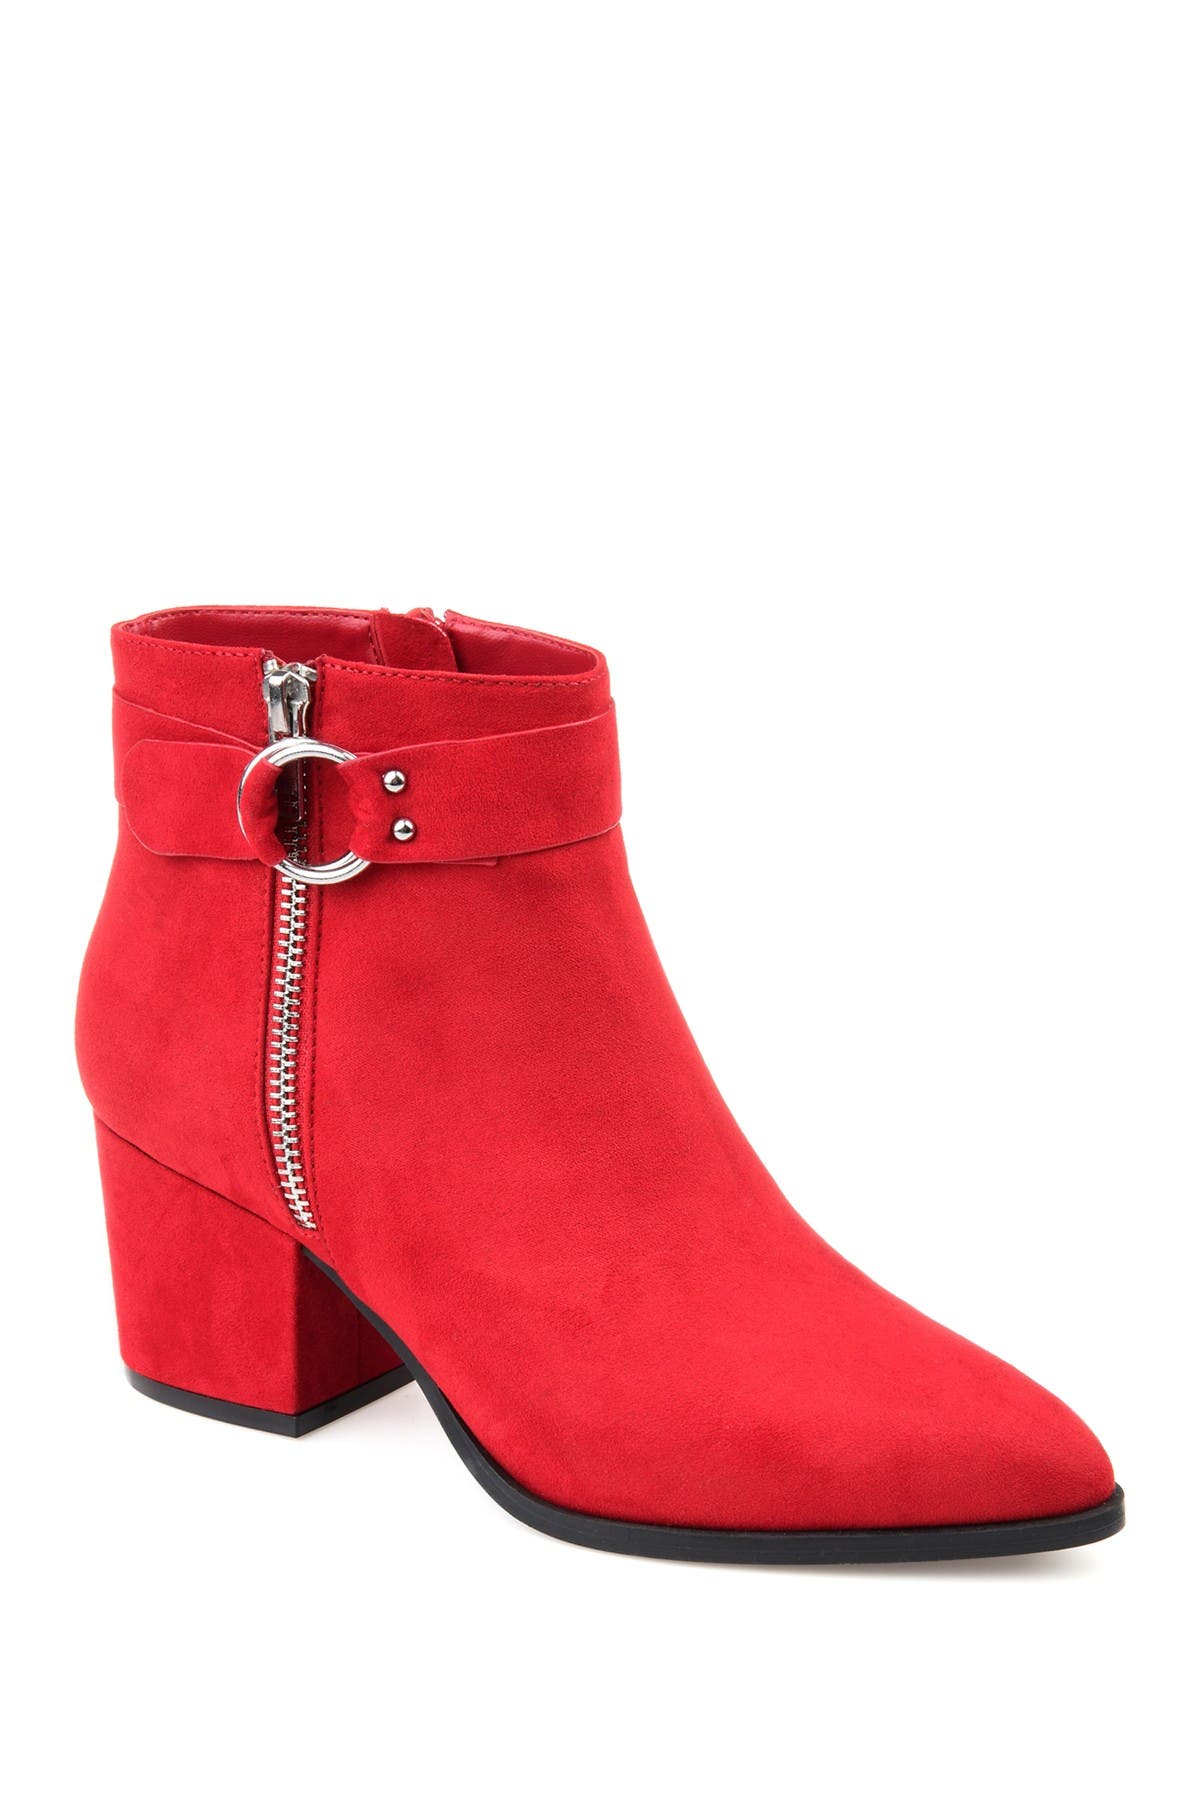 journee collection ankle boots